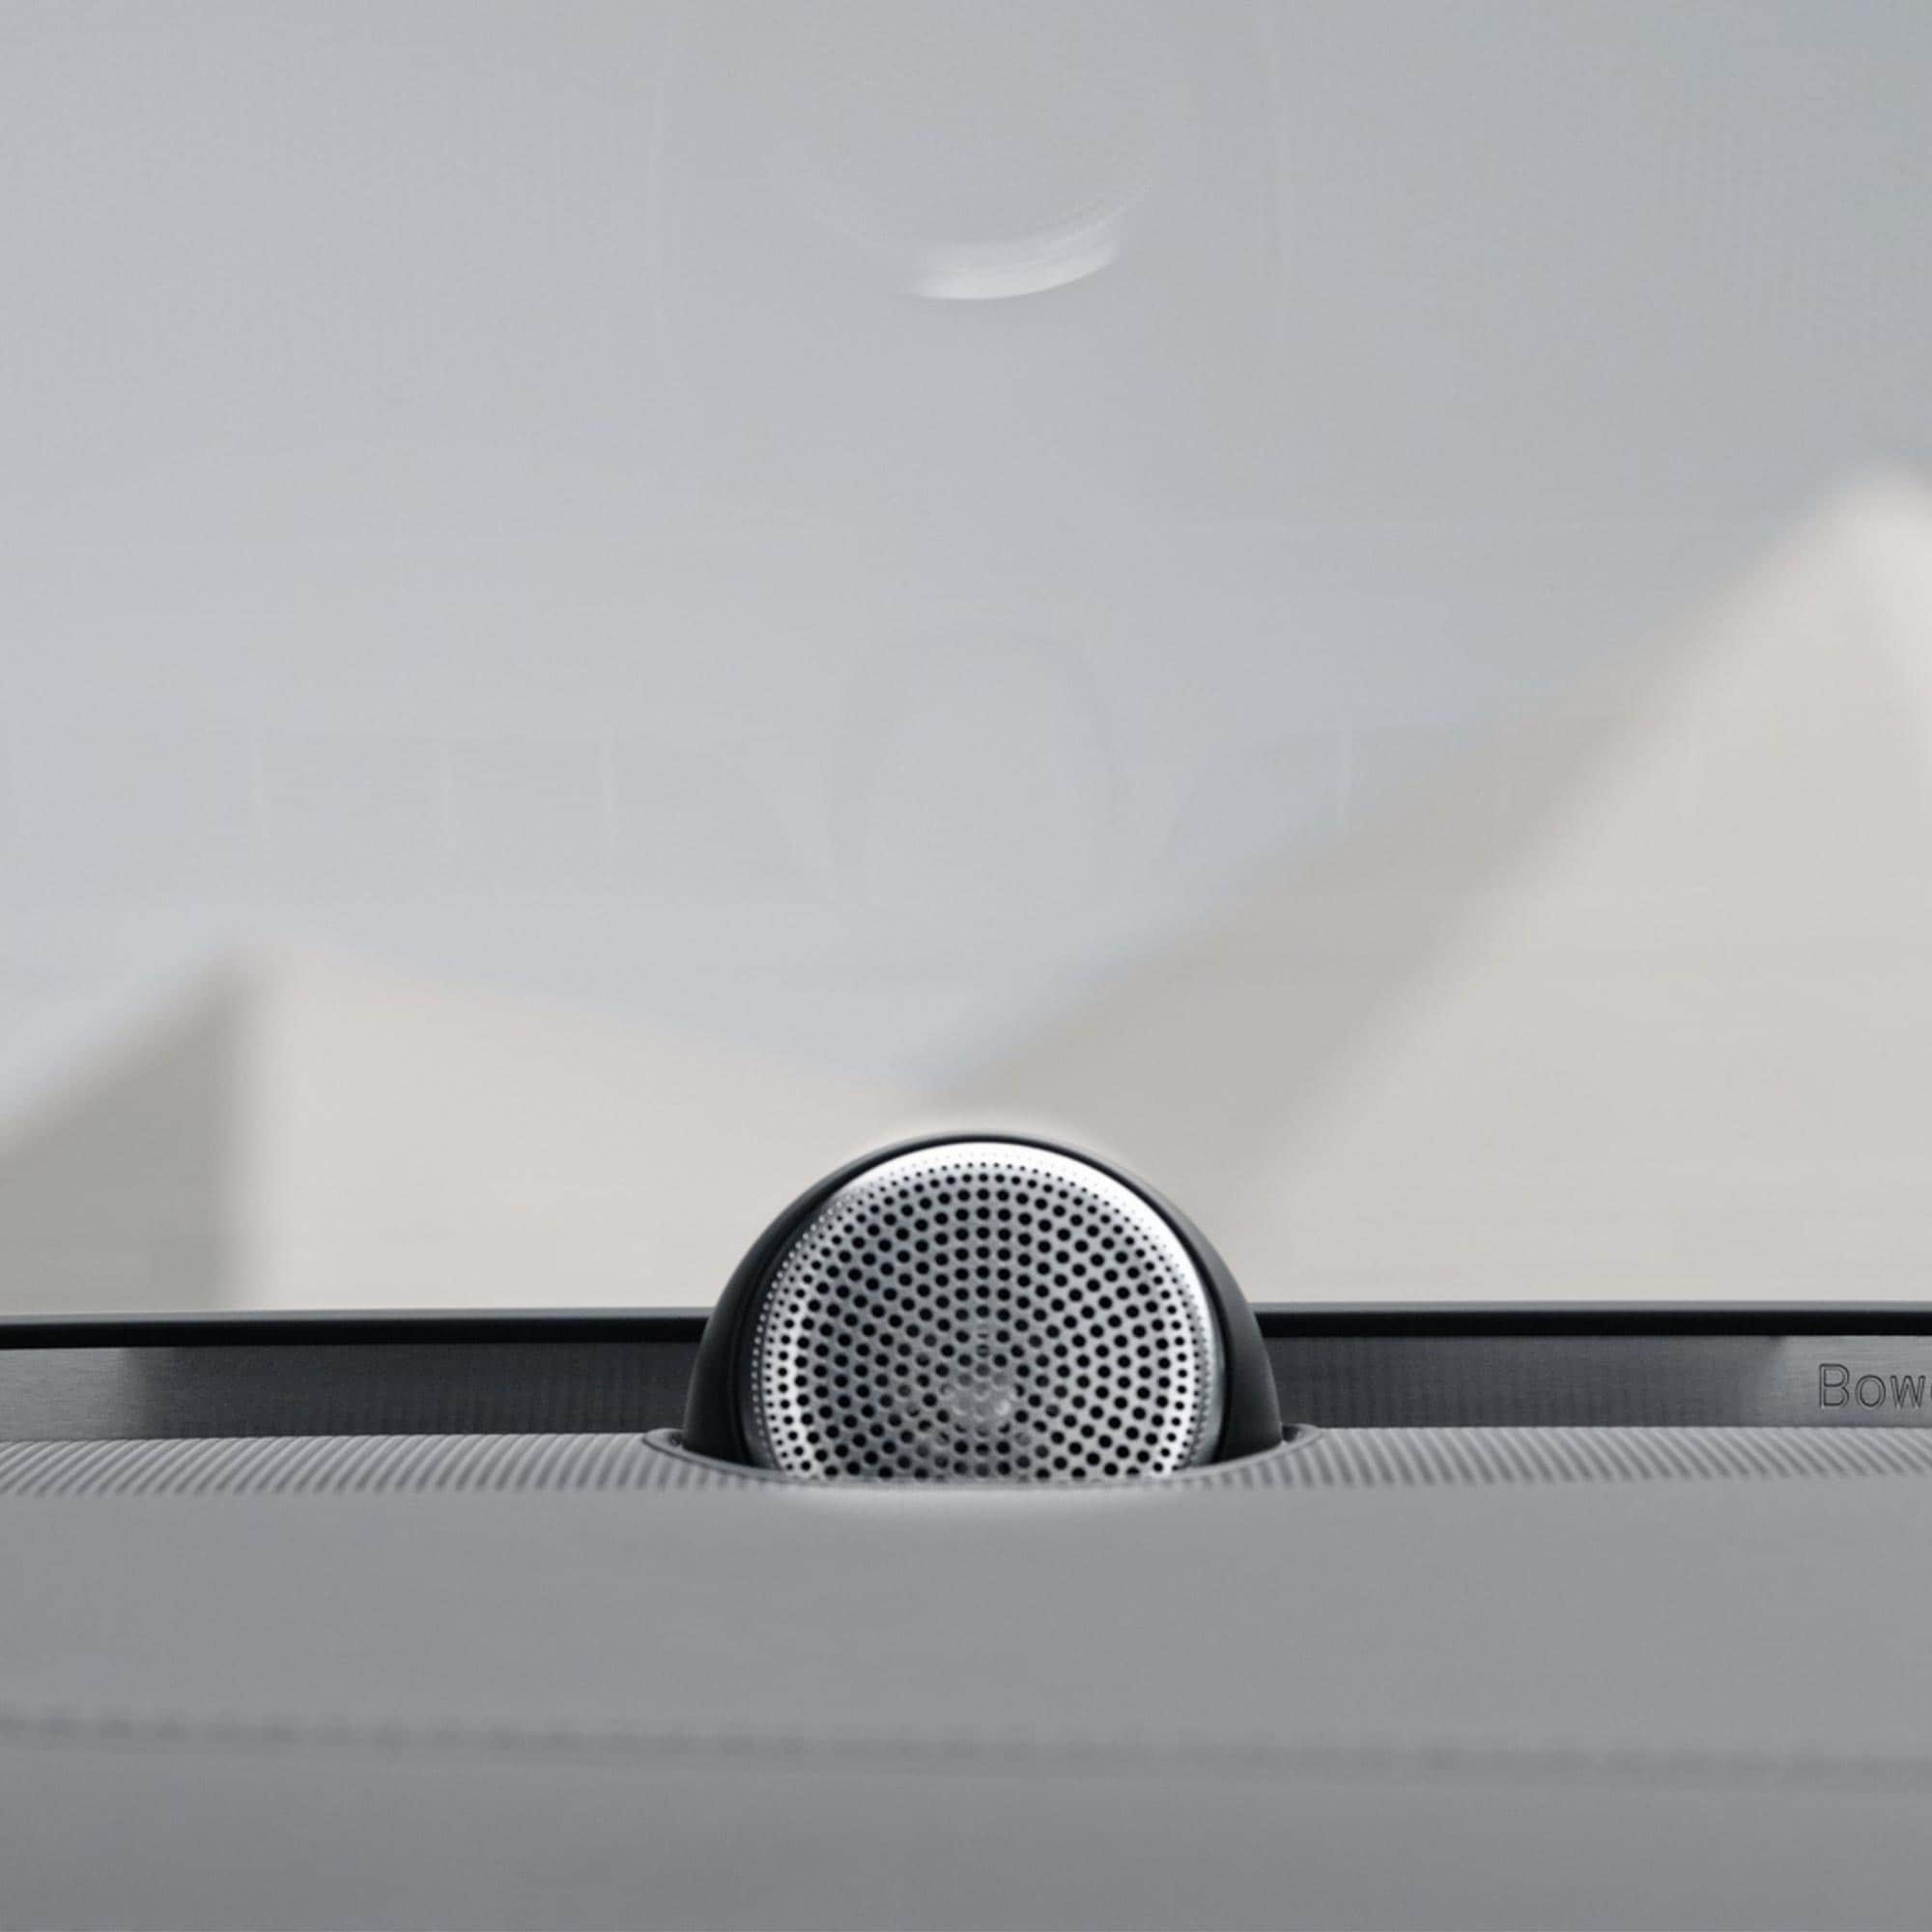 Impianto audio Bowers and Wilkins di Volvo V90 Cross Country.